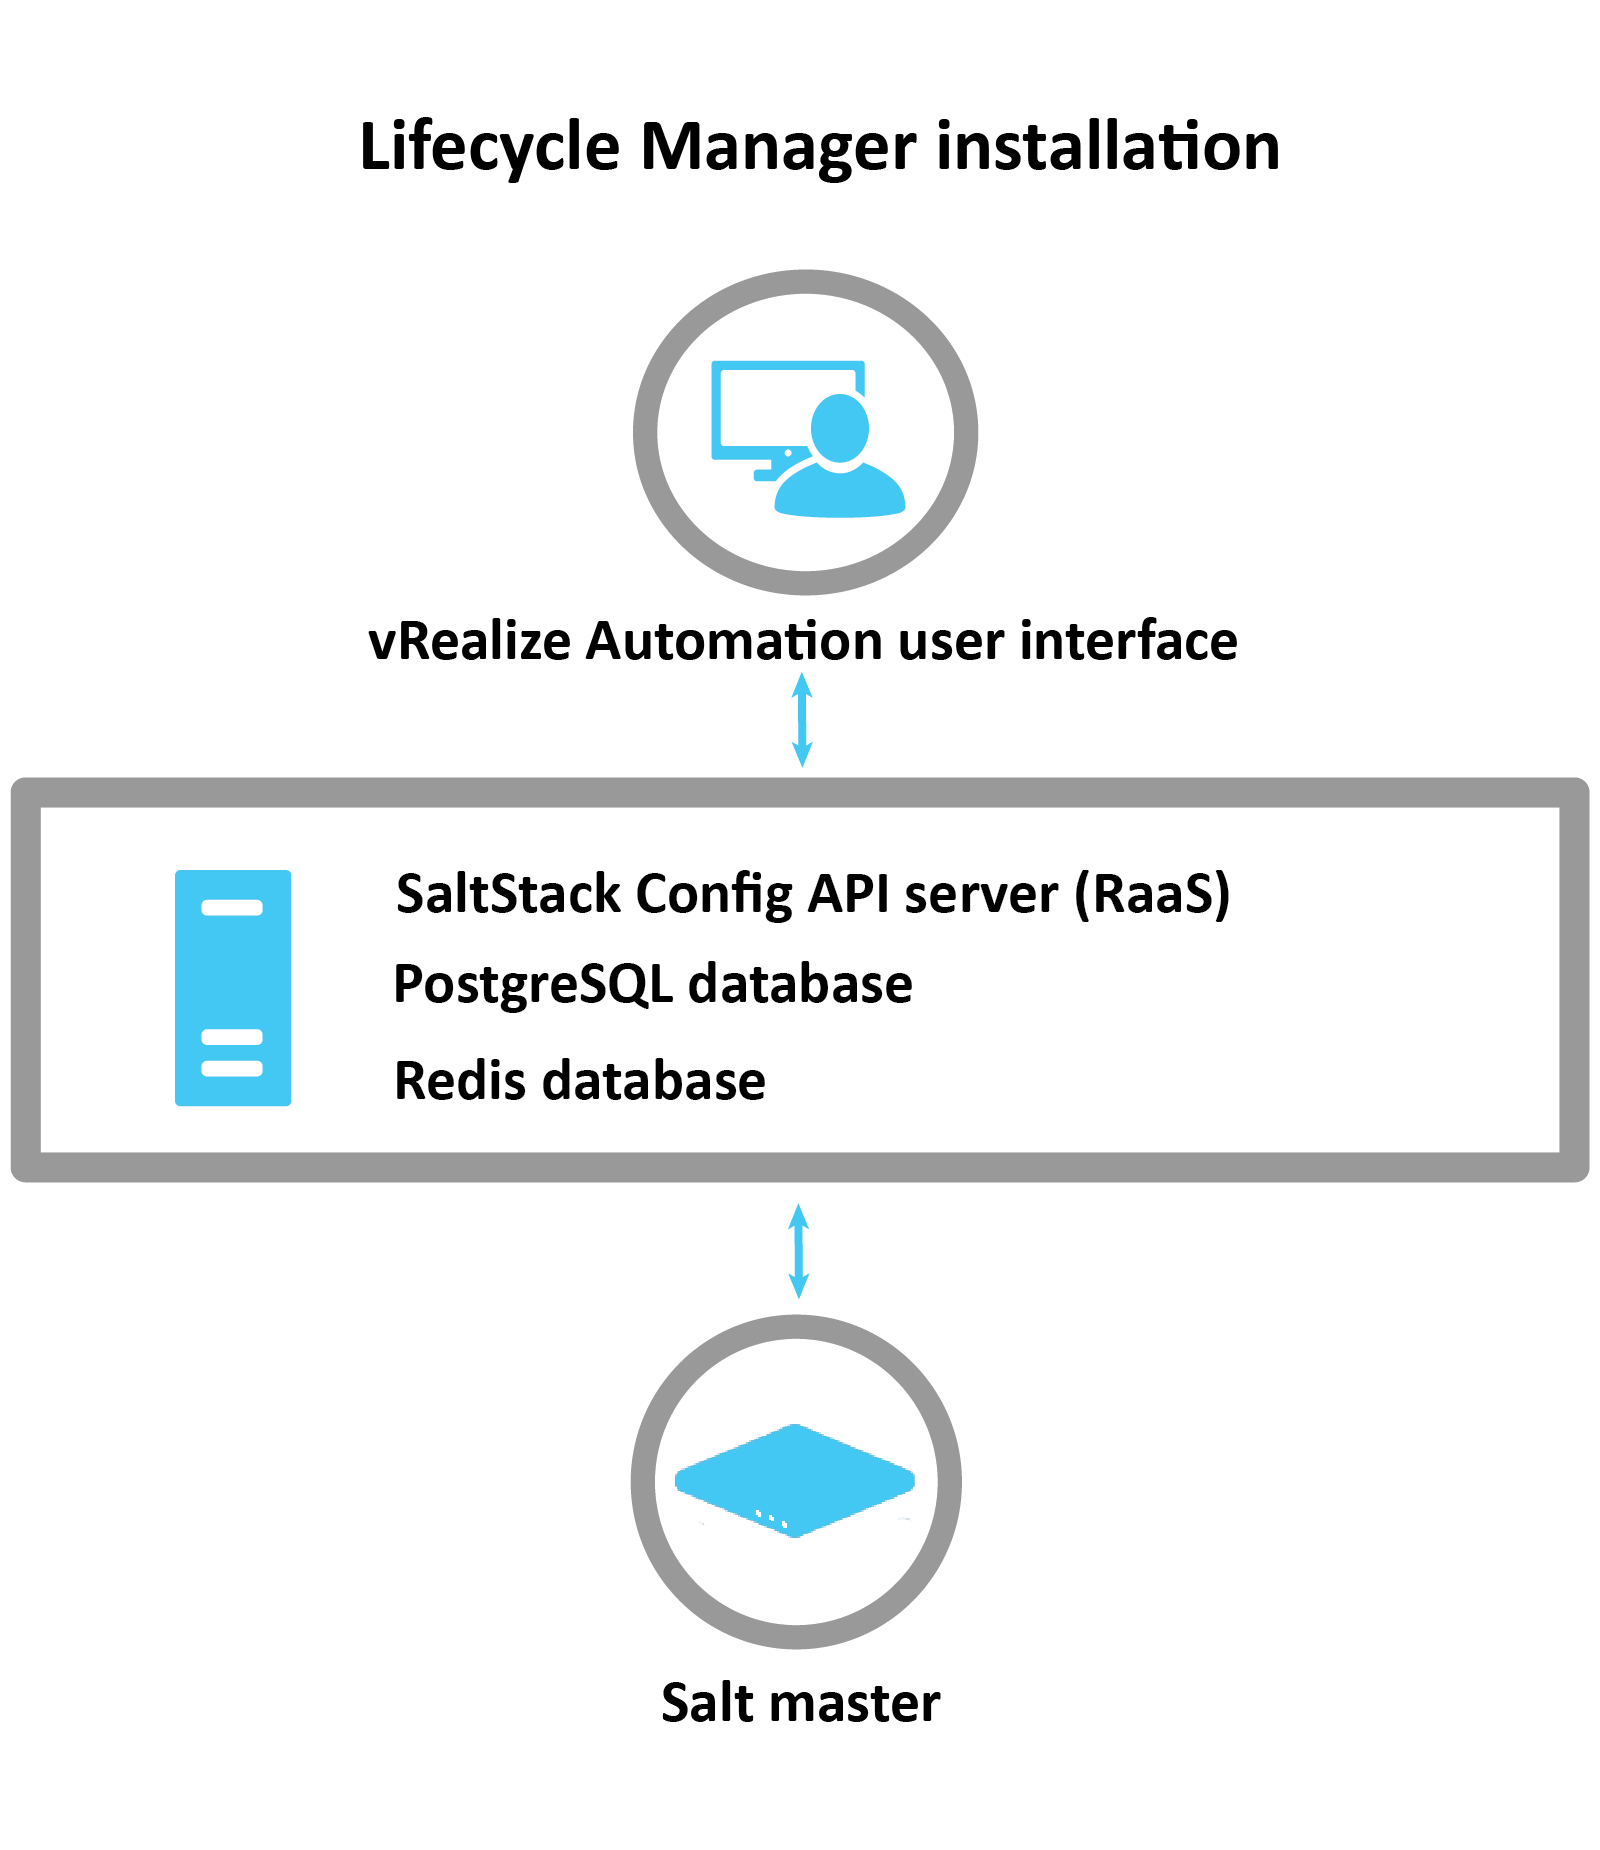 Diagram explaining how SaltStack is installed using LCM: LCM uses the vRA interface to install the RaaS server, Postgres database, and the Redis database. Once installed the Salt Master is configured.